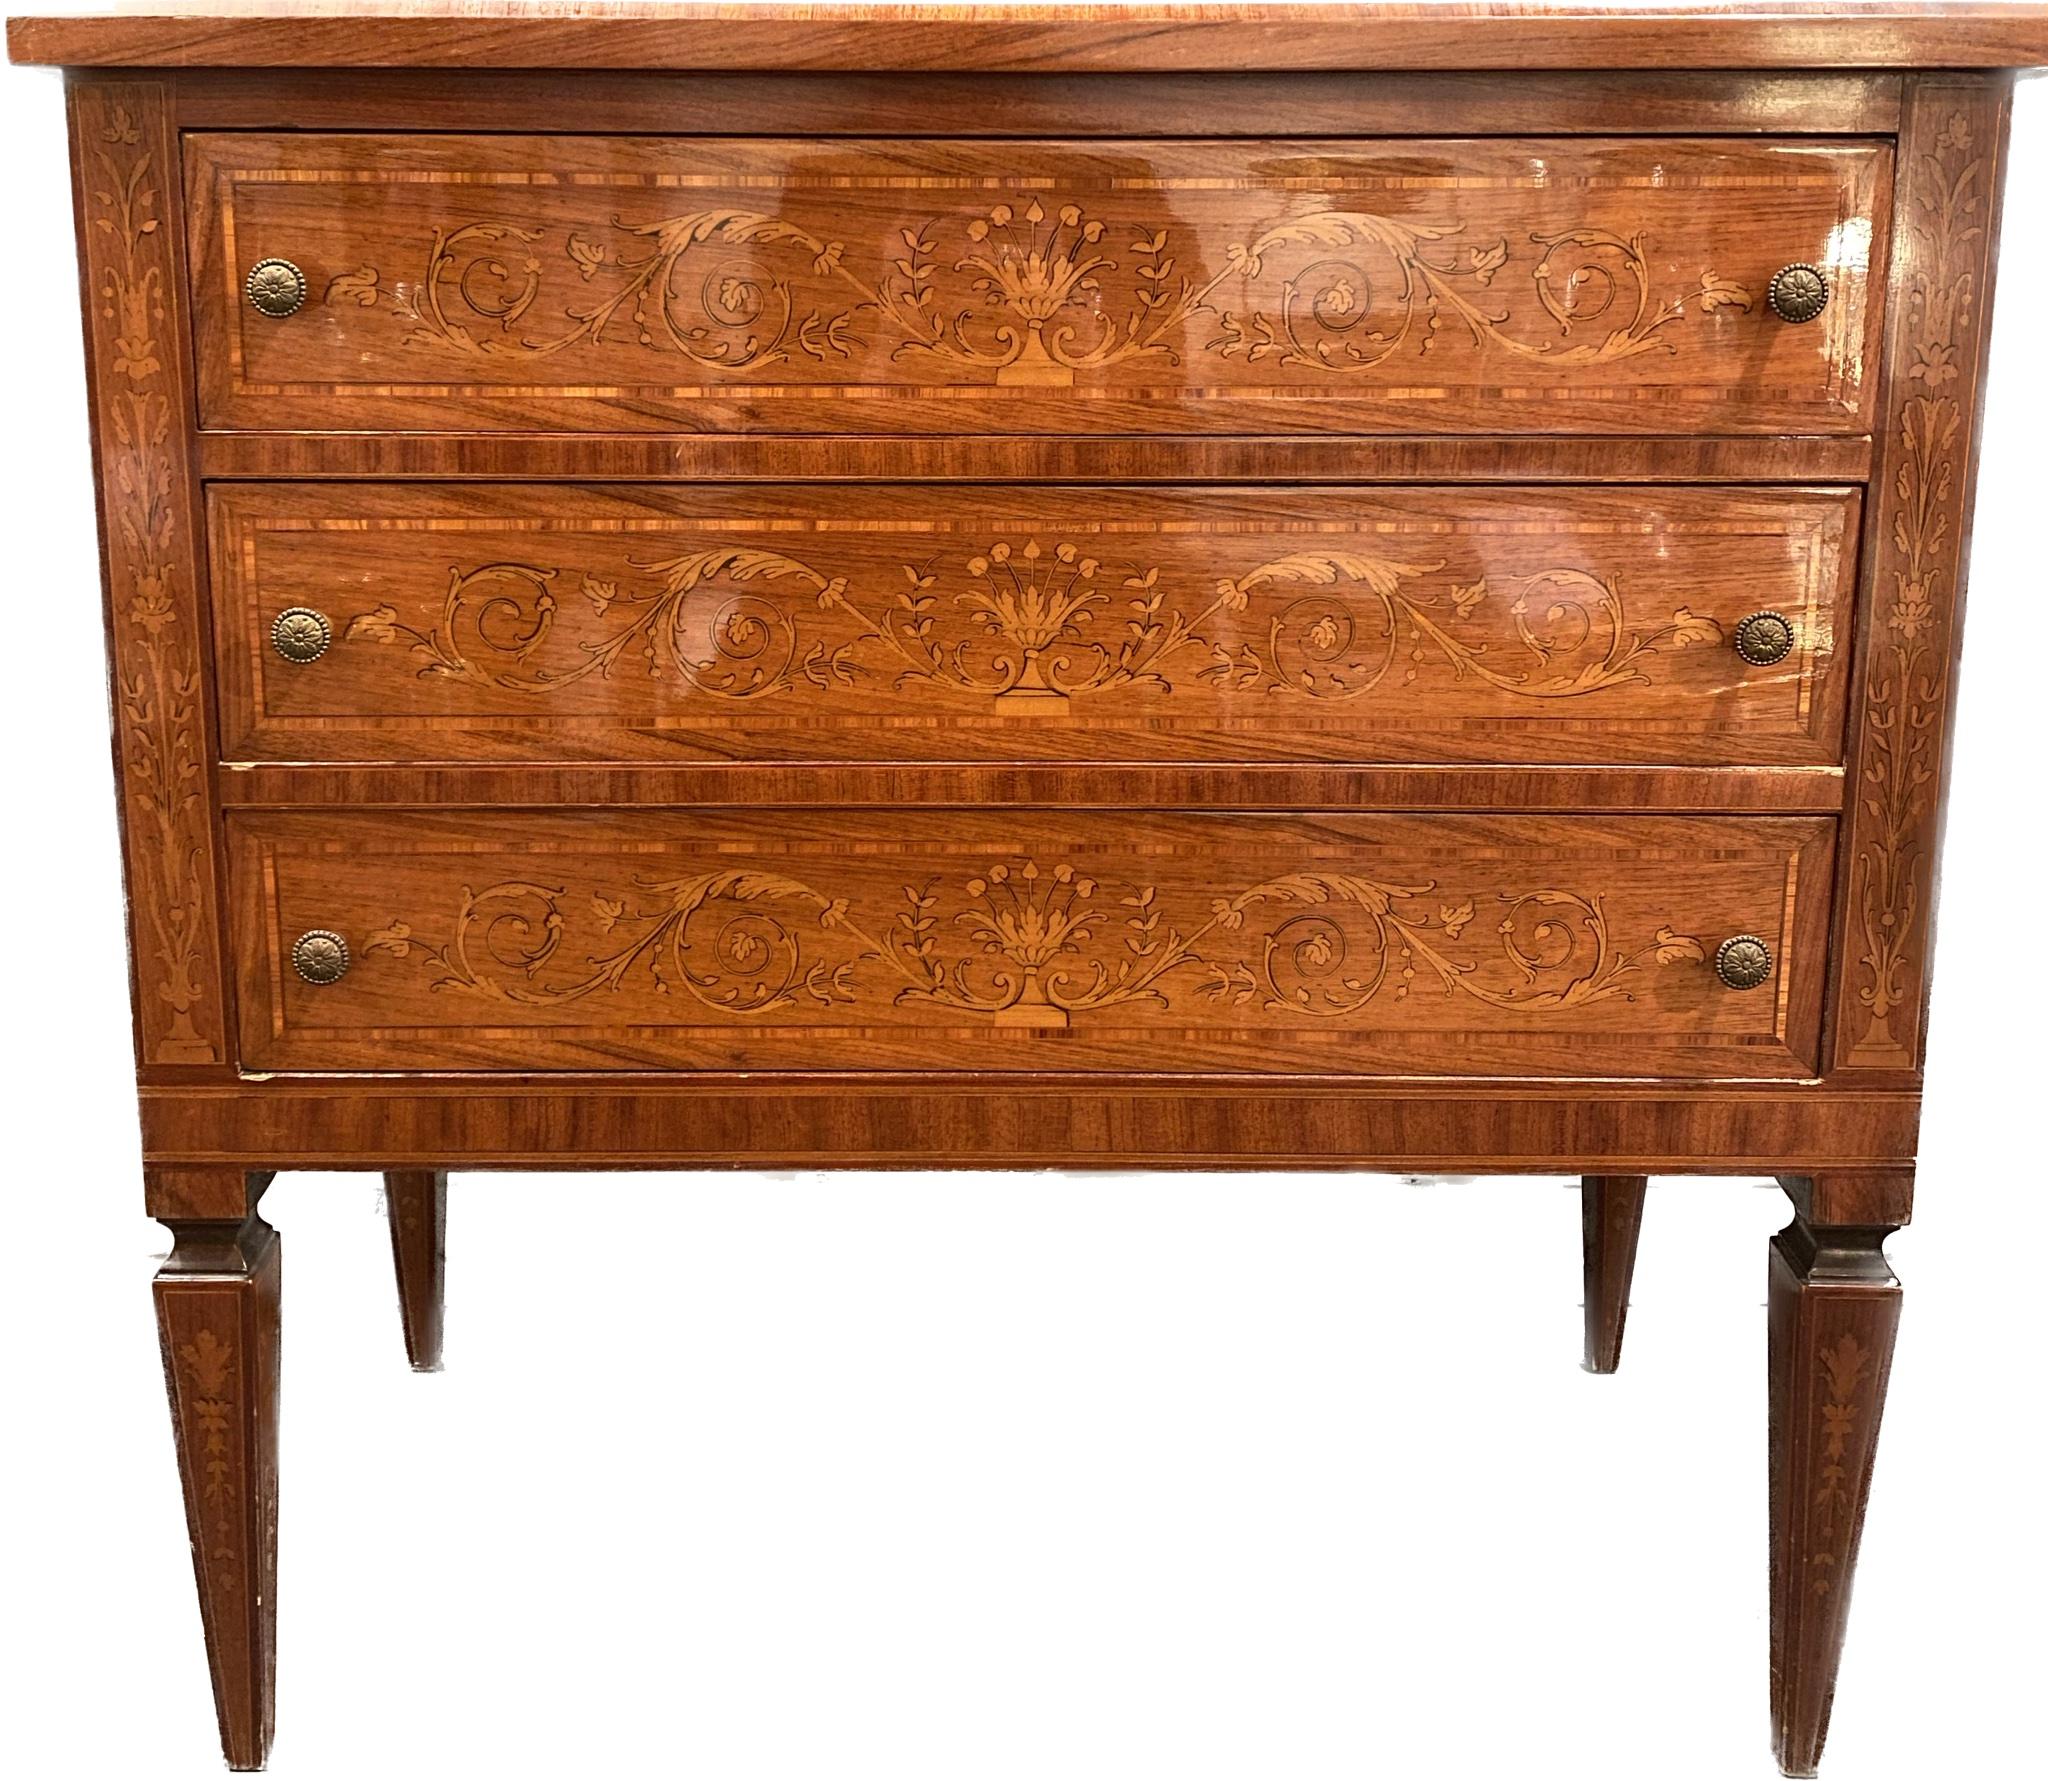 Chest of drawers in the Louis XVI style
Italian chest of drawers 
1960-1970
Inlaid walnut 
Three drawers 
Dimensions : H 81x L 78 x P 39cm 
Ref ; 1001
Price : 2800€ for this piece.